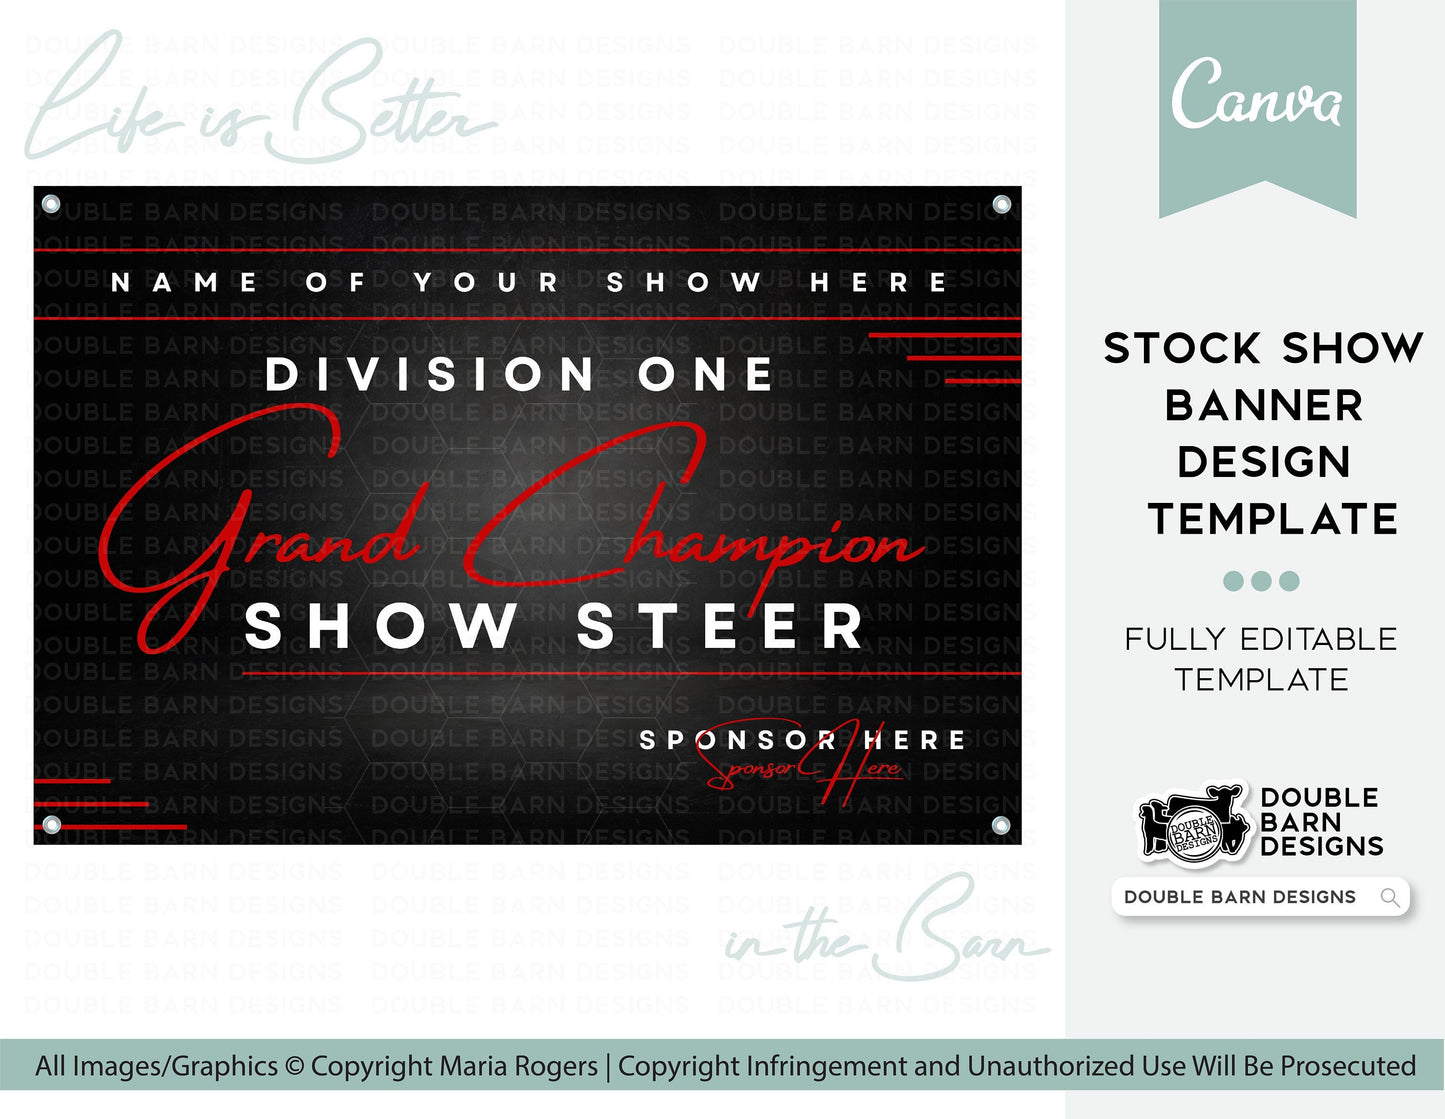 Stock Show Banner Canva Template | Red and Black Champion Banner Template | Editable Canva Template | 3x2' Stock Show Banner Template